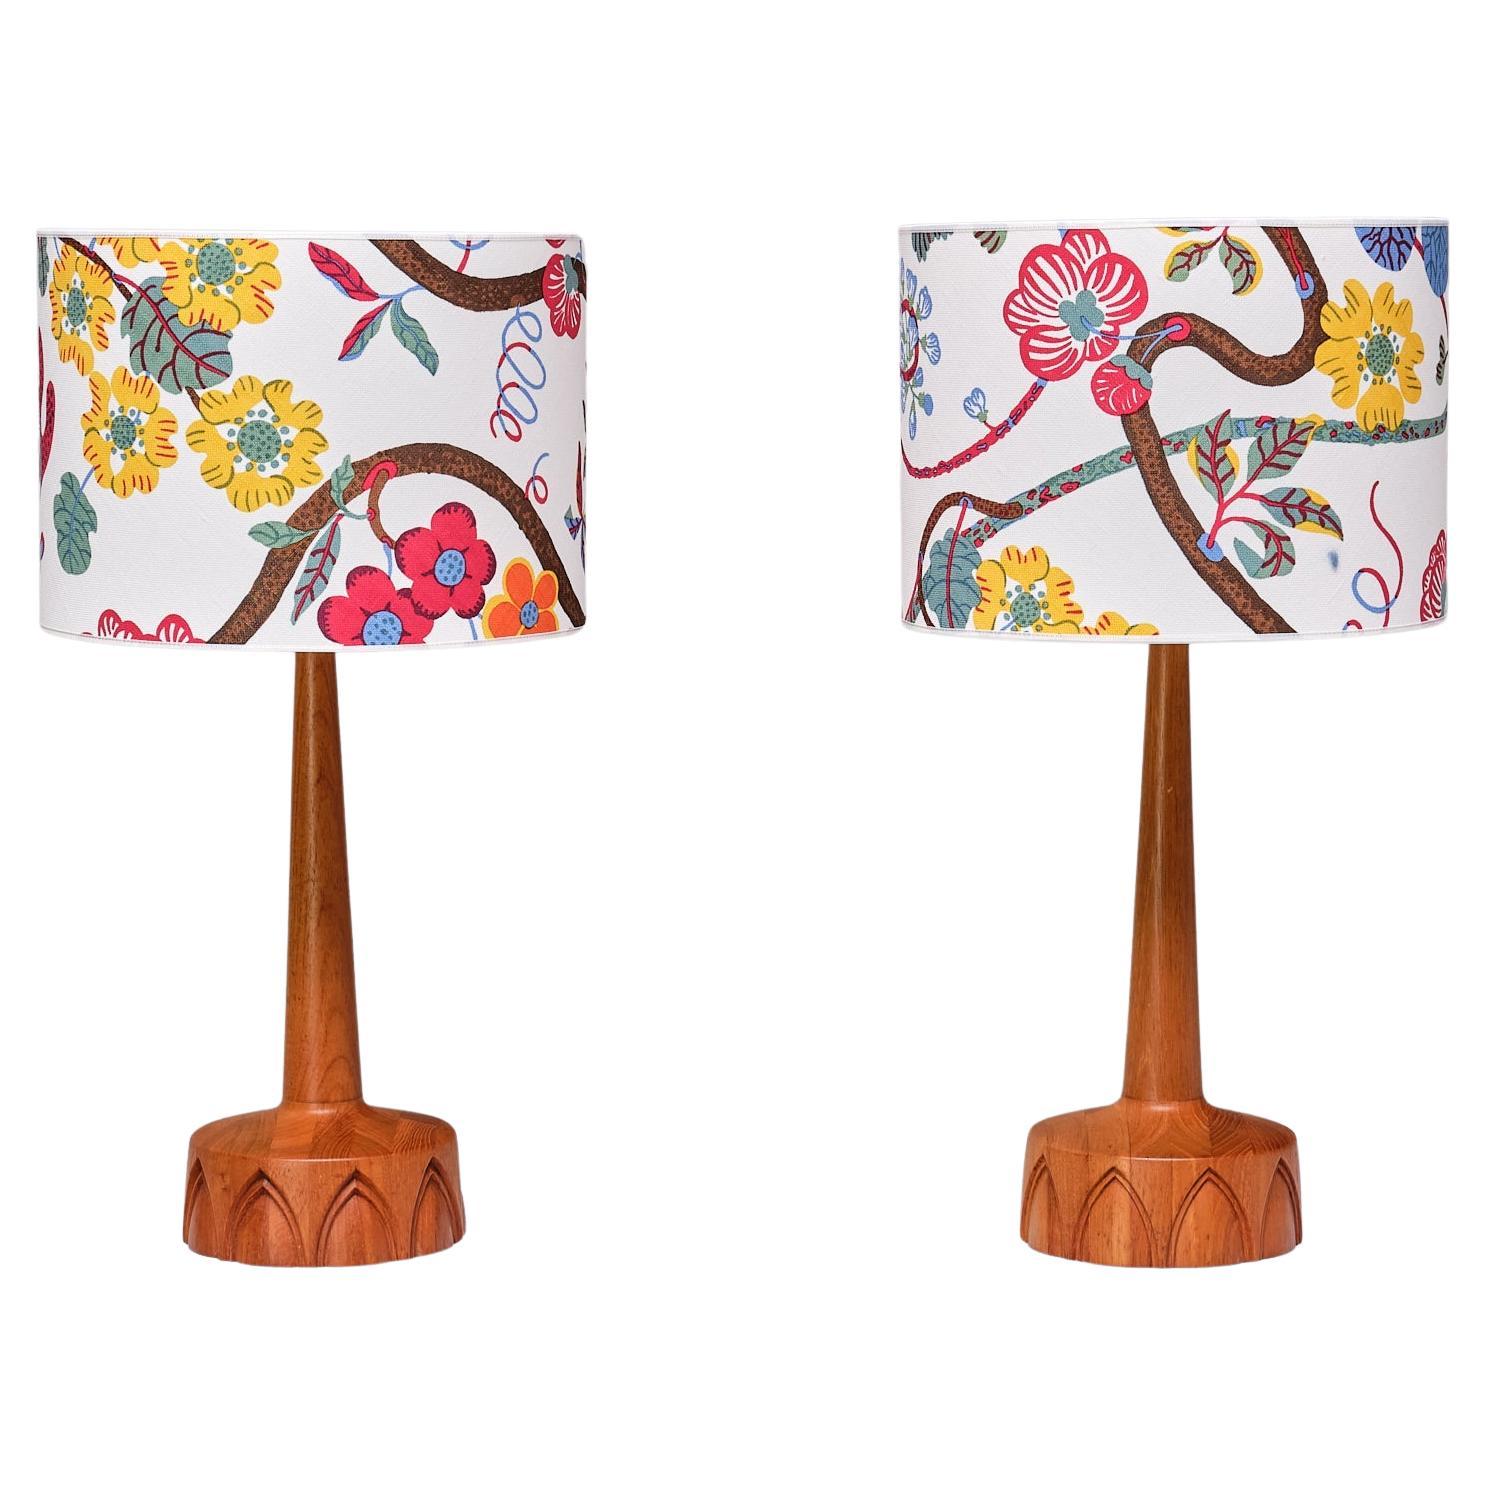 Pair of Stilarmatur Tranås Table Lamps with Josef Frank Shades, Sweden, 1960s For Sale